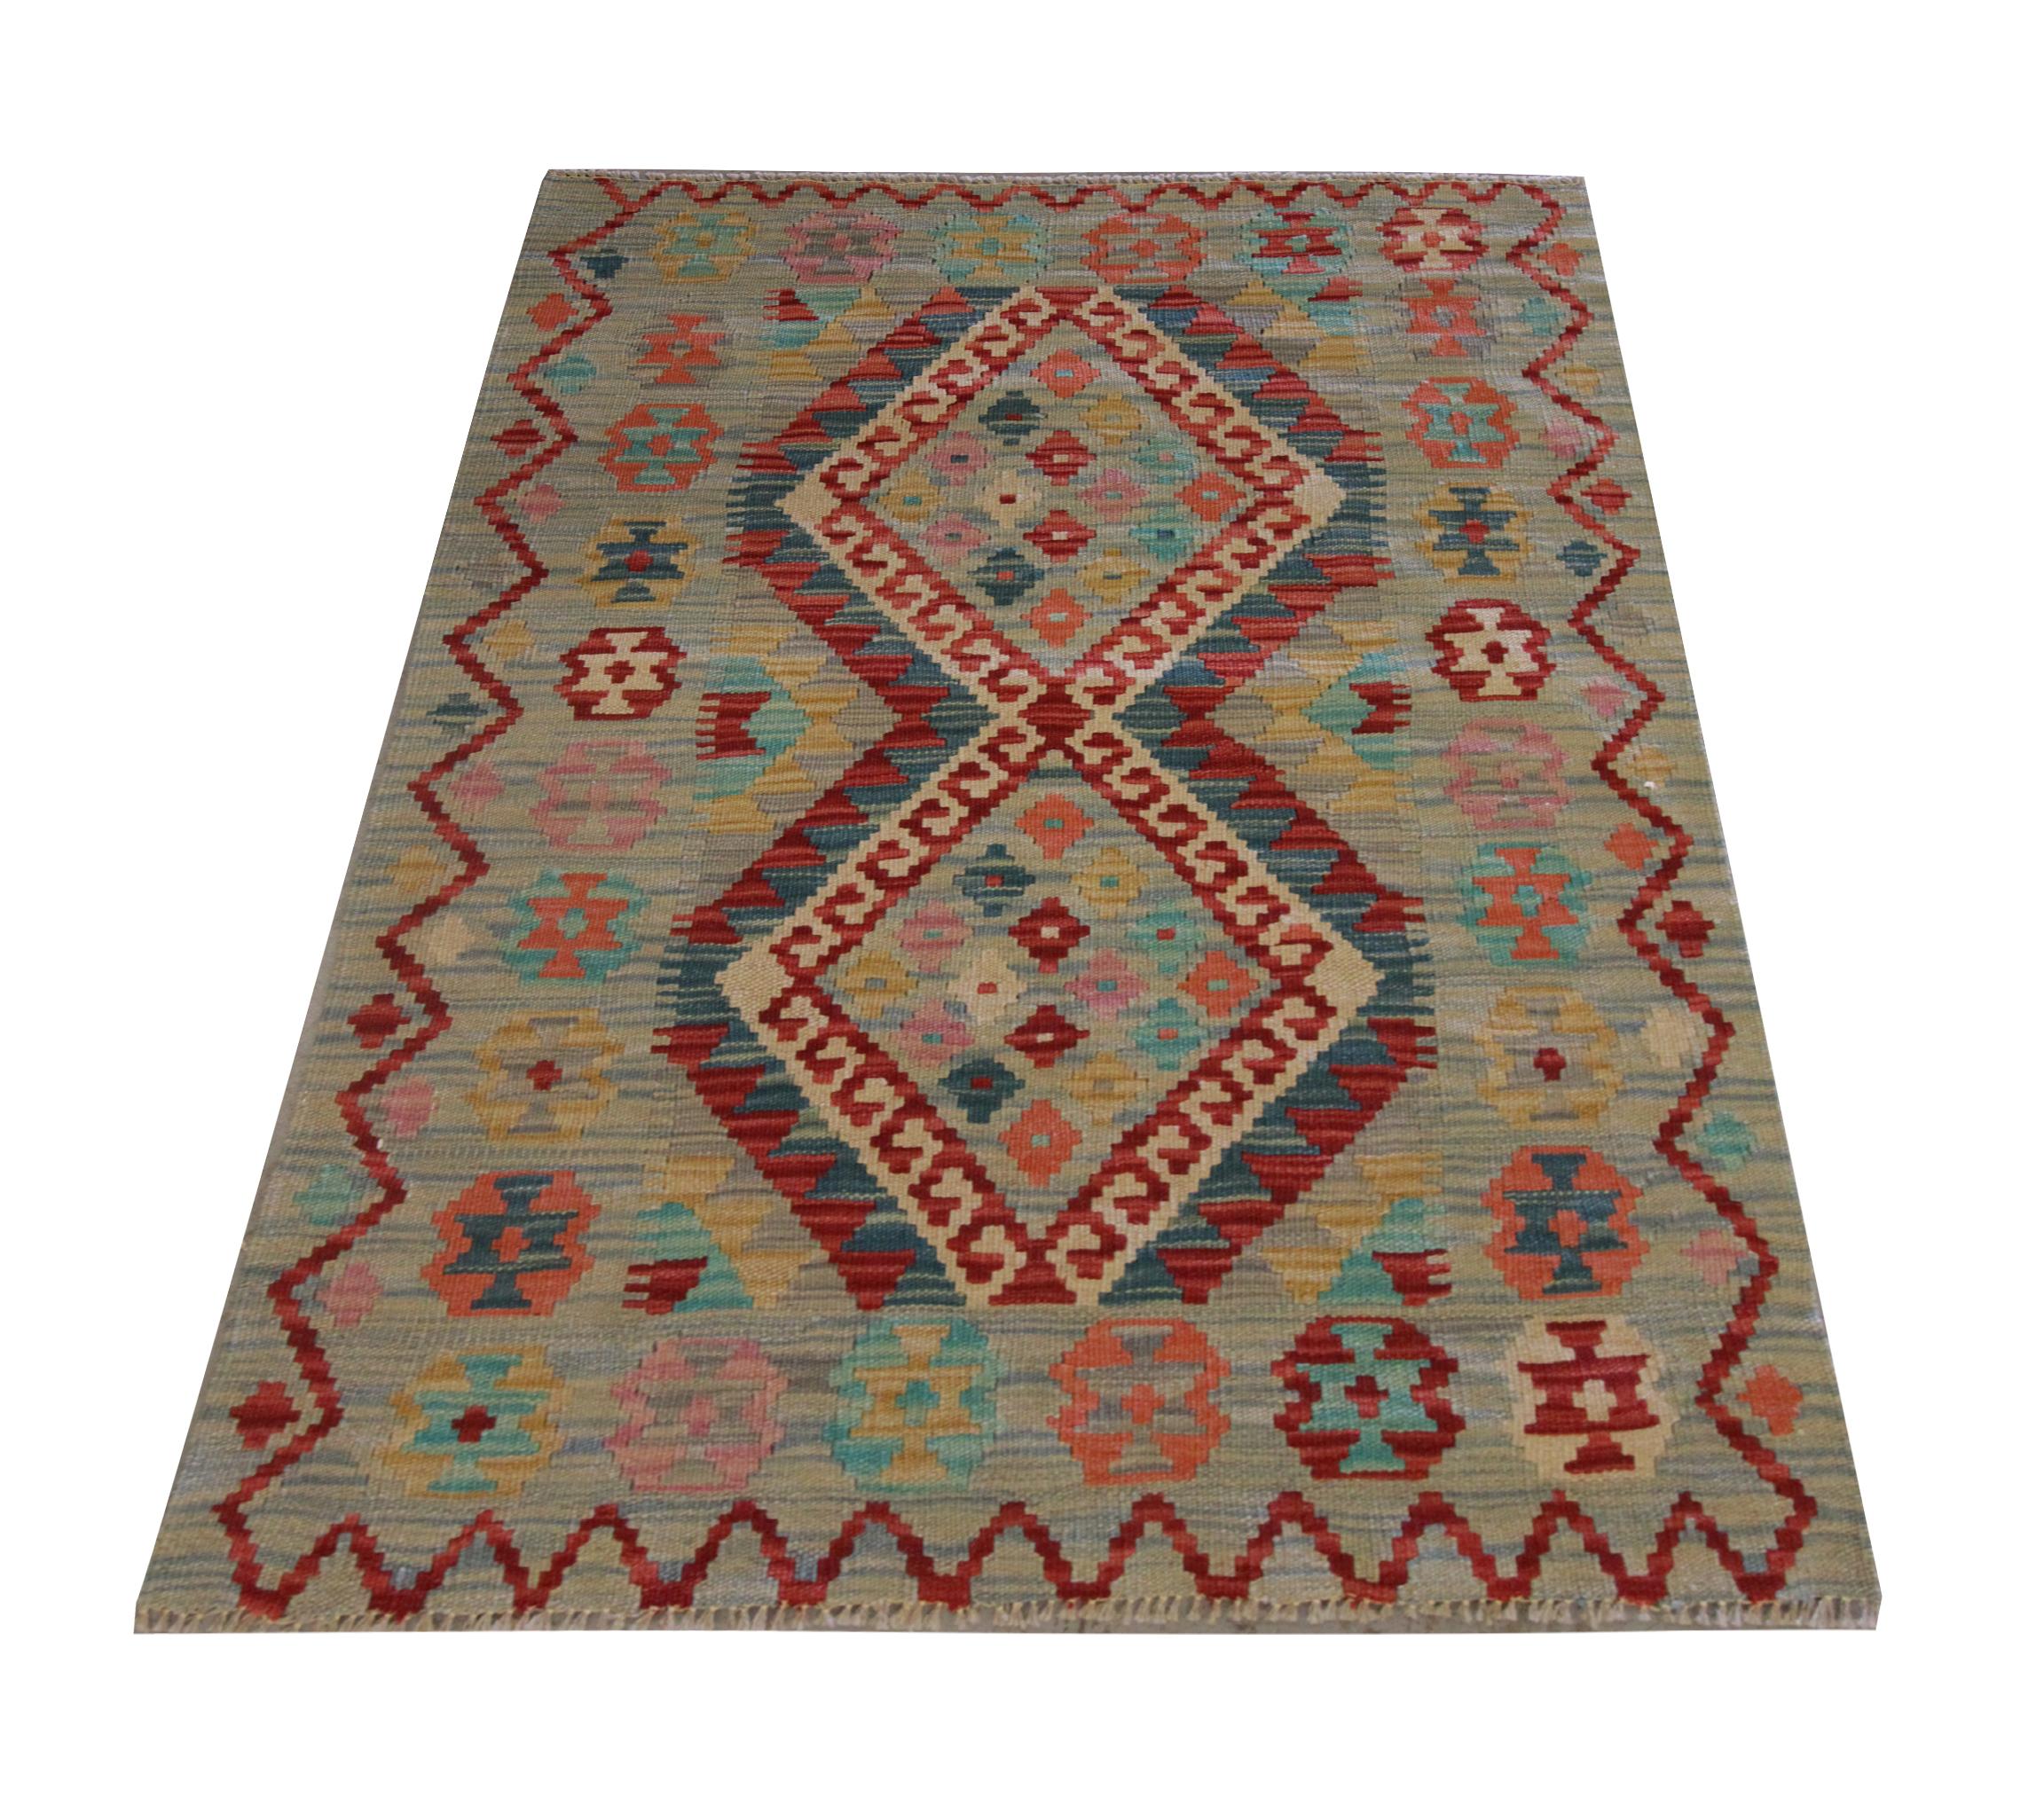 This fine wool area rug is a handwoven Afghan kilim constructed in the early 21st century. Radiant colours make up the two medallions in the centre, featuring blue, red, green and cream on a subtle grey-blue background. This has then been framed by